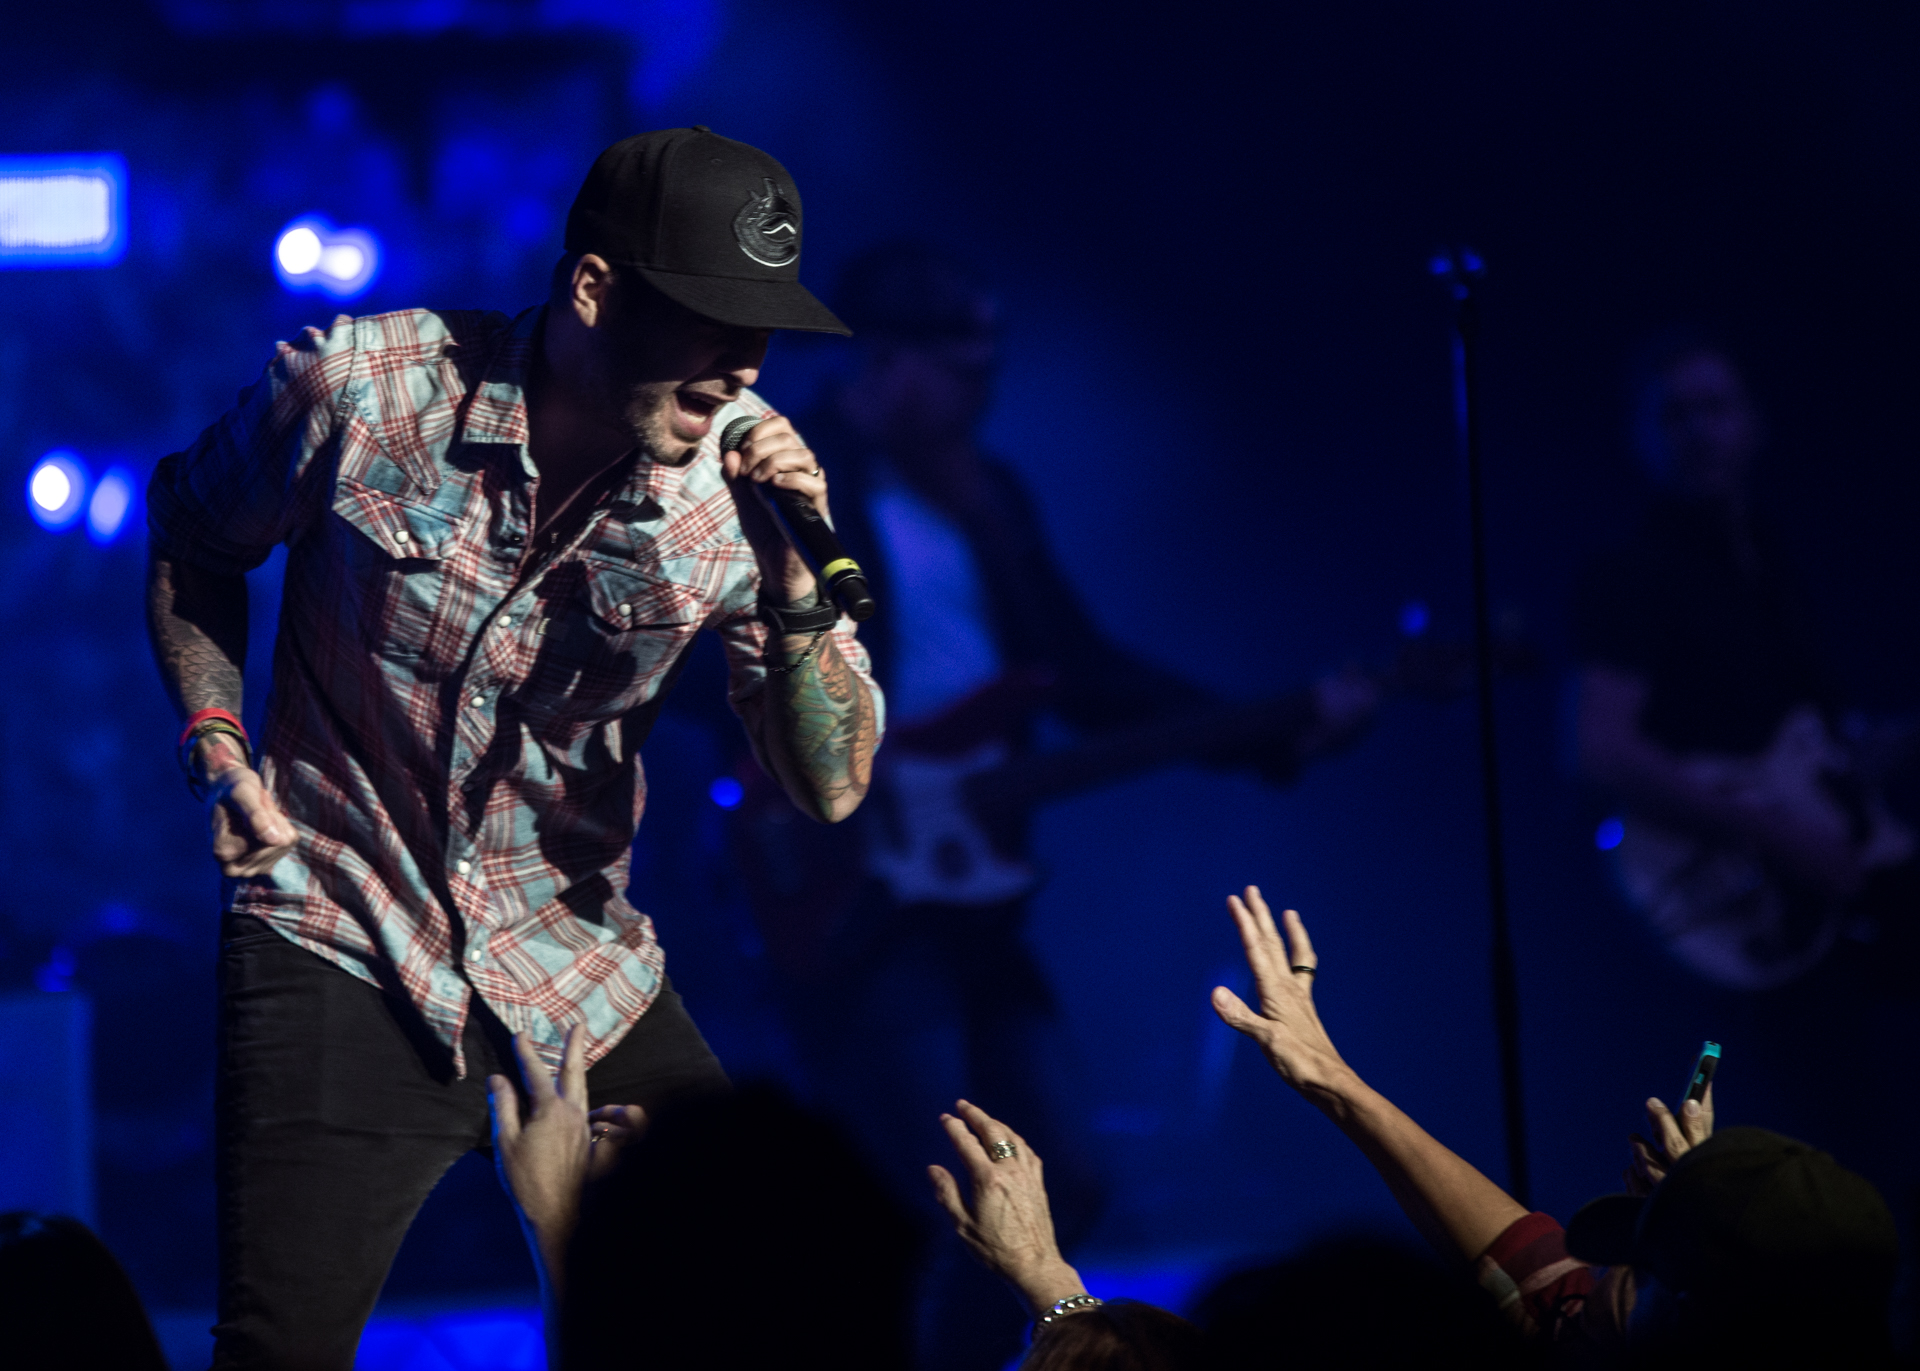 Dallas Smith, clad in a red and green plaid shirt and a baseball cap, takes the stage, singing into a microphone. The energy is palpable as the audience reaches out towards him, creating a dynamic connection between the artist and the crowd.